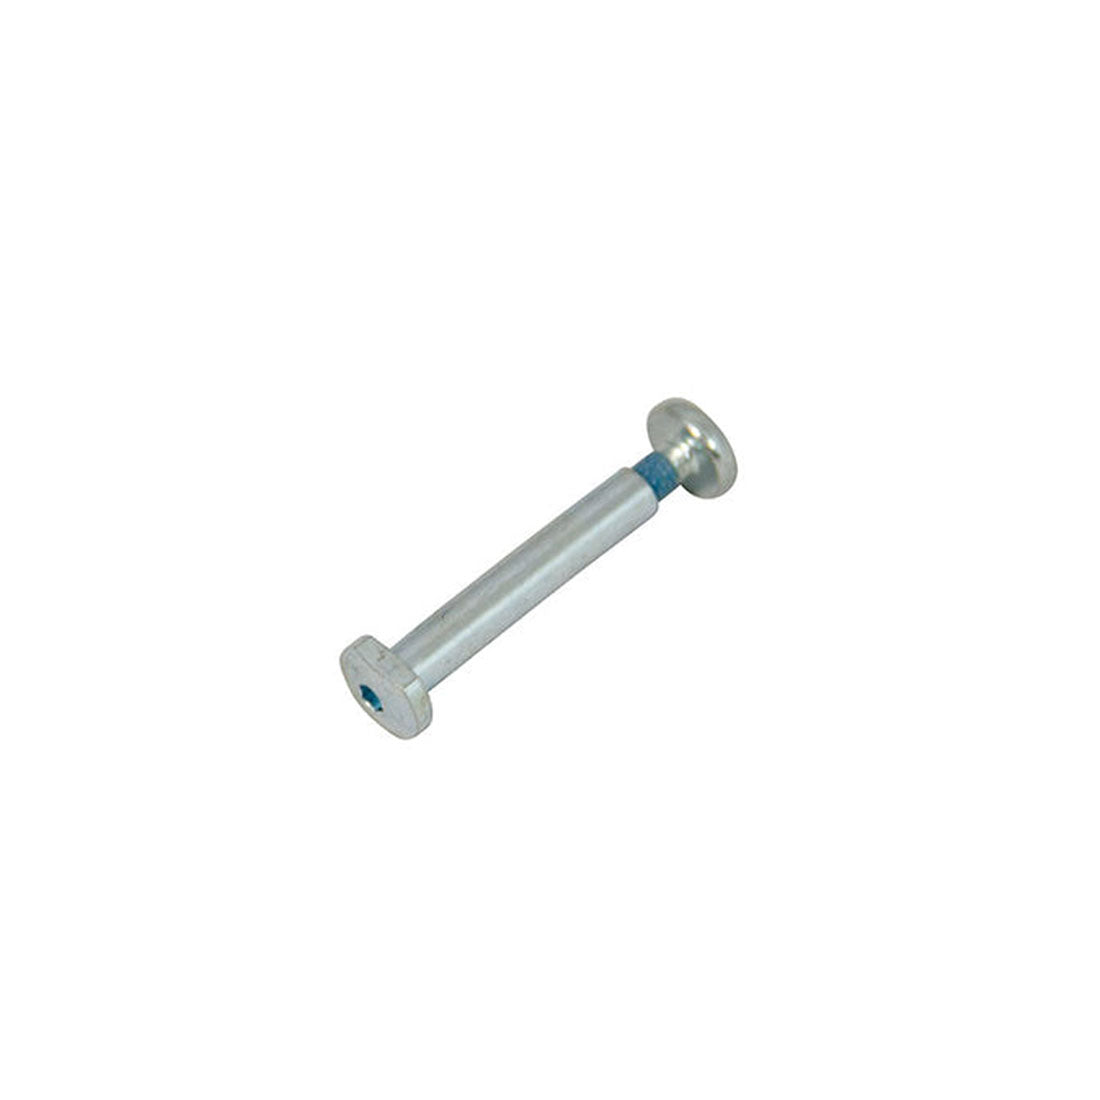 Micro Maxi Axle 44mm - 1228 Scooter Hardware and Parts